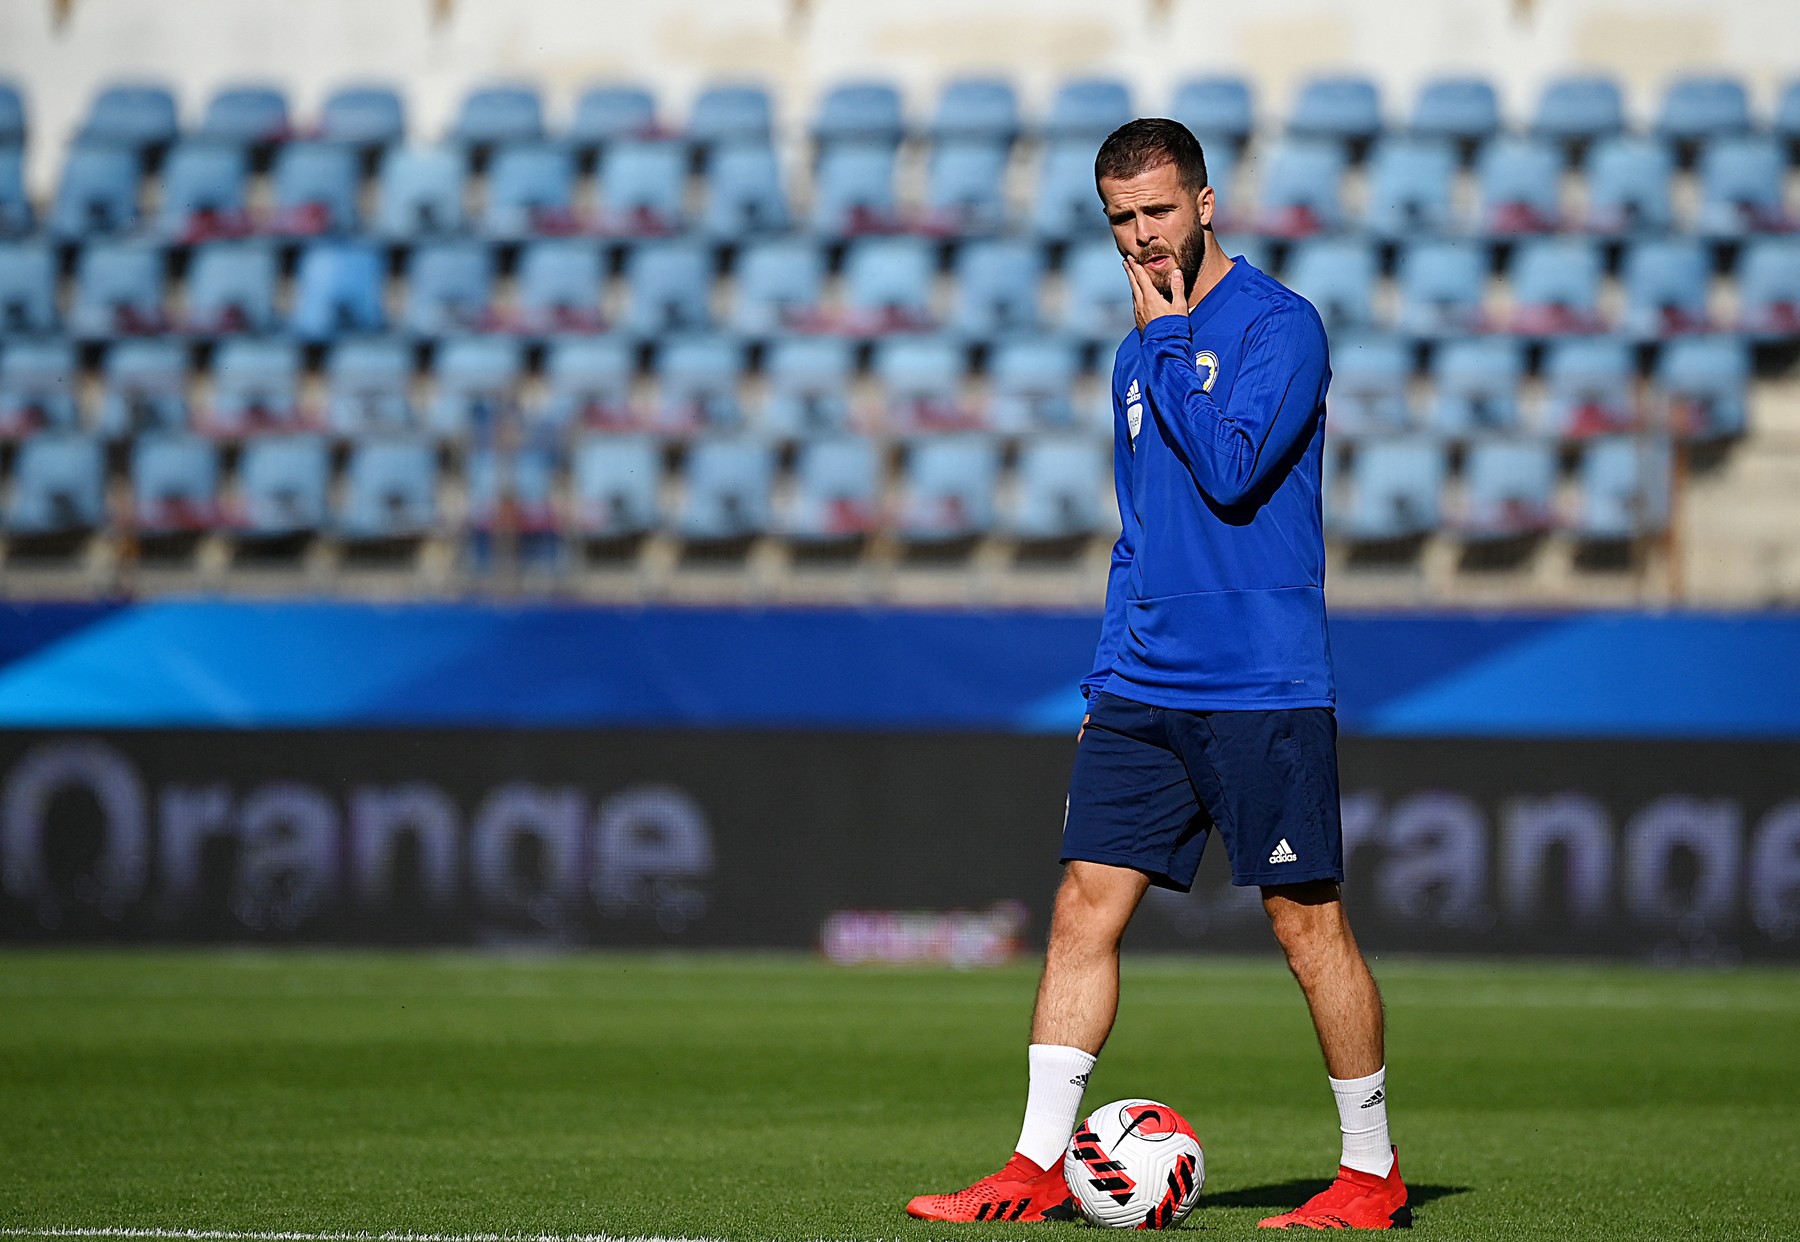 Bosnia-Herzegovina's midfielder Miralem Pjanic looks as he attends a training session at the Meineau stadium in Strasbourg, on August 31, 2021 on the eve of the FIFA World Cup Qatar 2022 qualification Group D football match between France and Bosnia-Herzegovina.,Image: 629656072, License: Rights-managed, Restrictions: , Model Release: no, Credit line: FRANCK FIFE / AFP / Profimedia